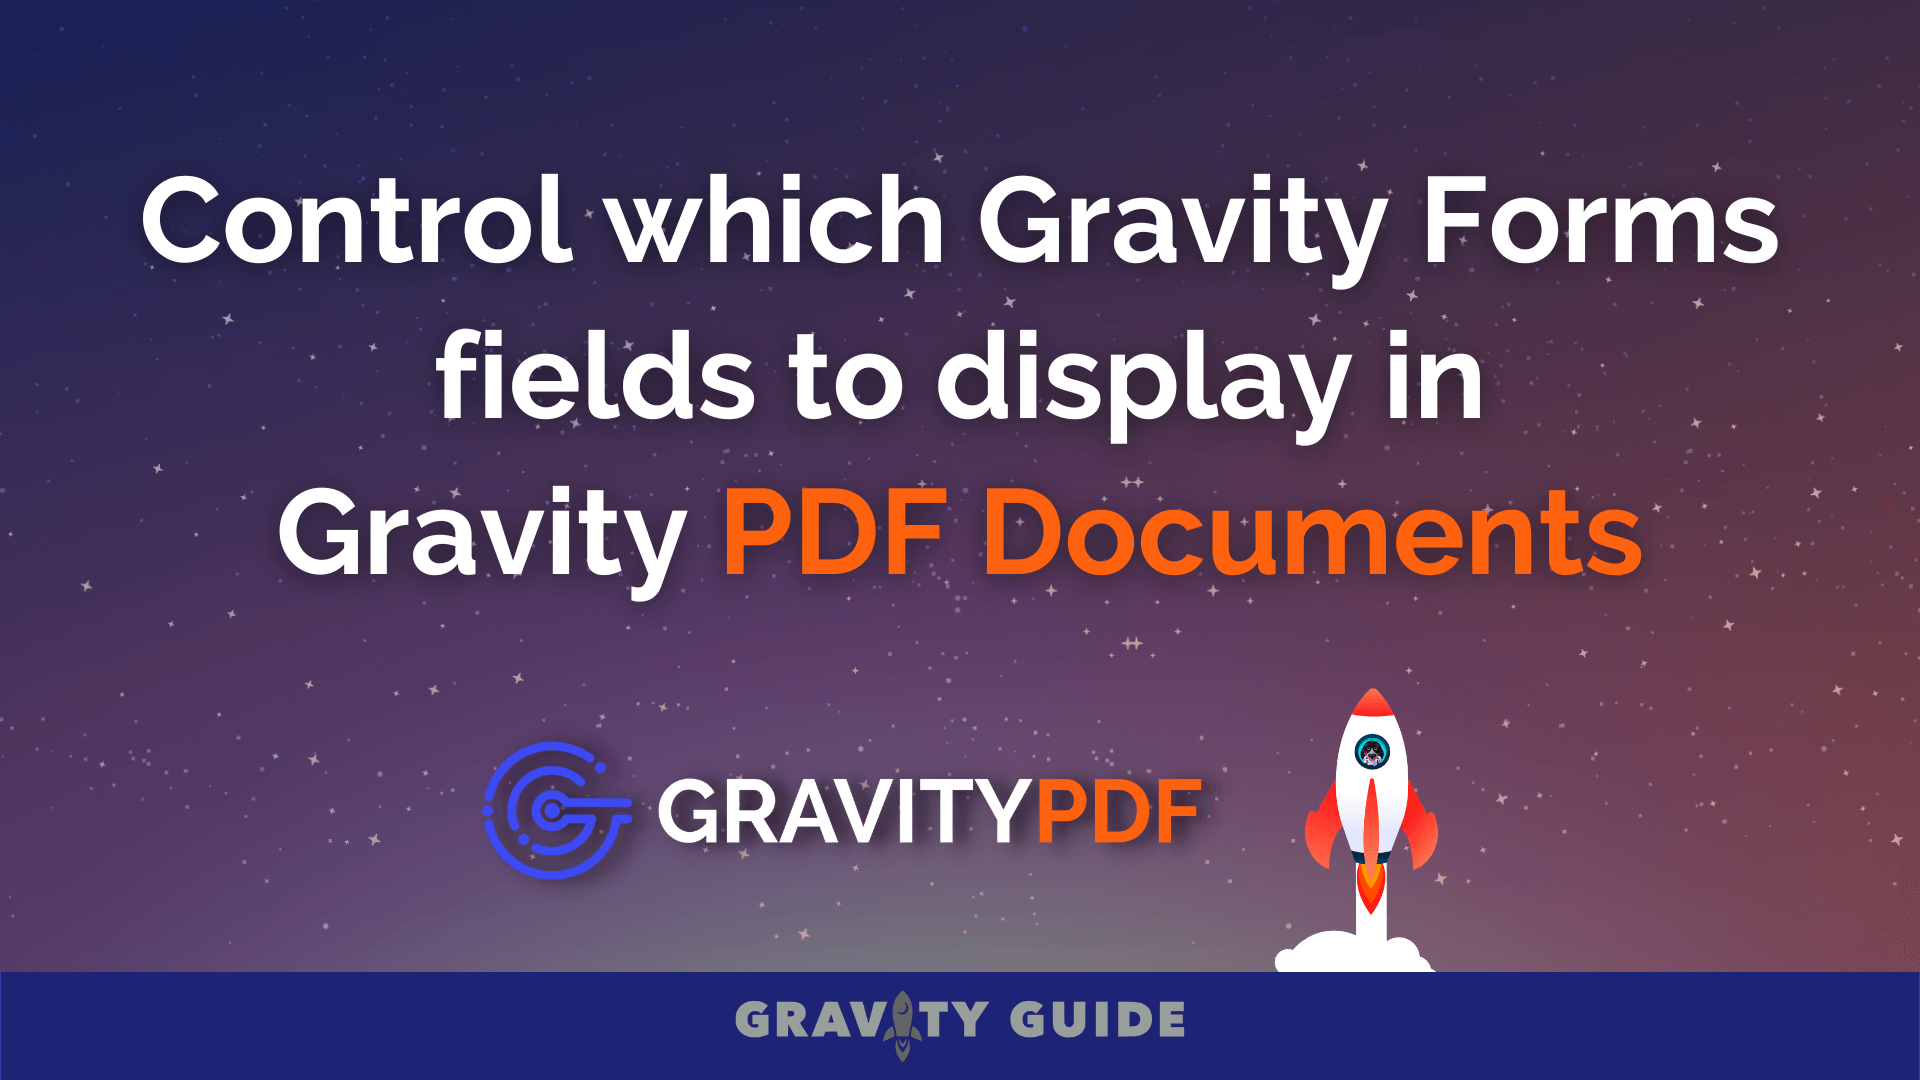 Control which Gravity Forms fields to display in Gravity PDF Documents